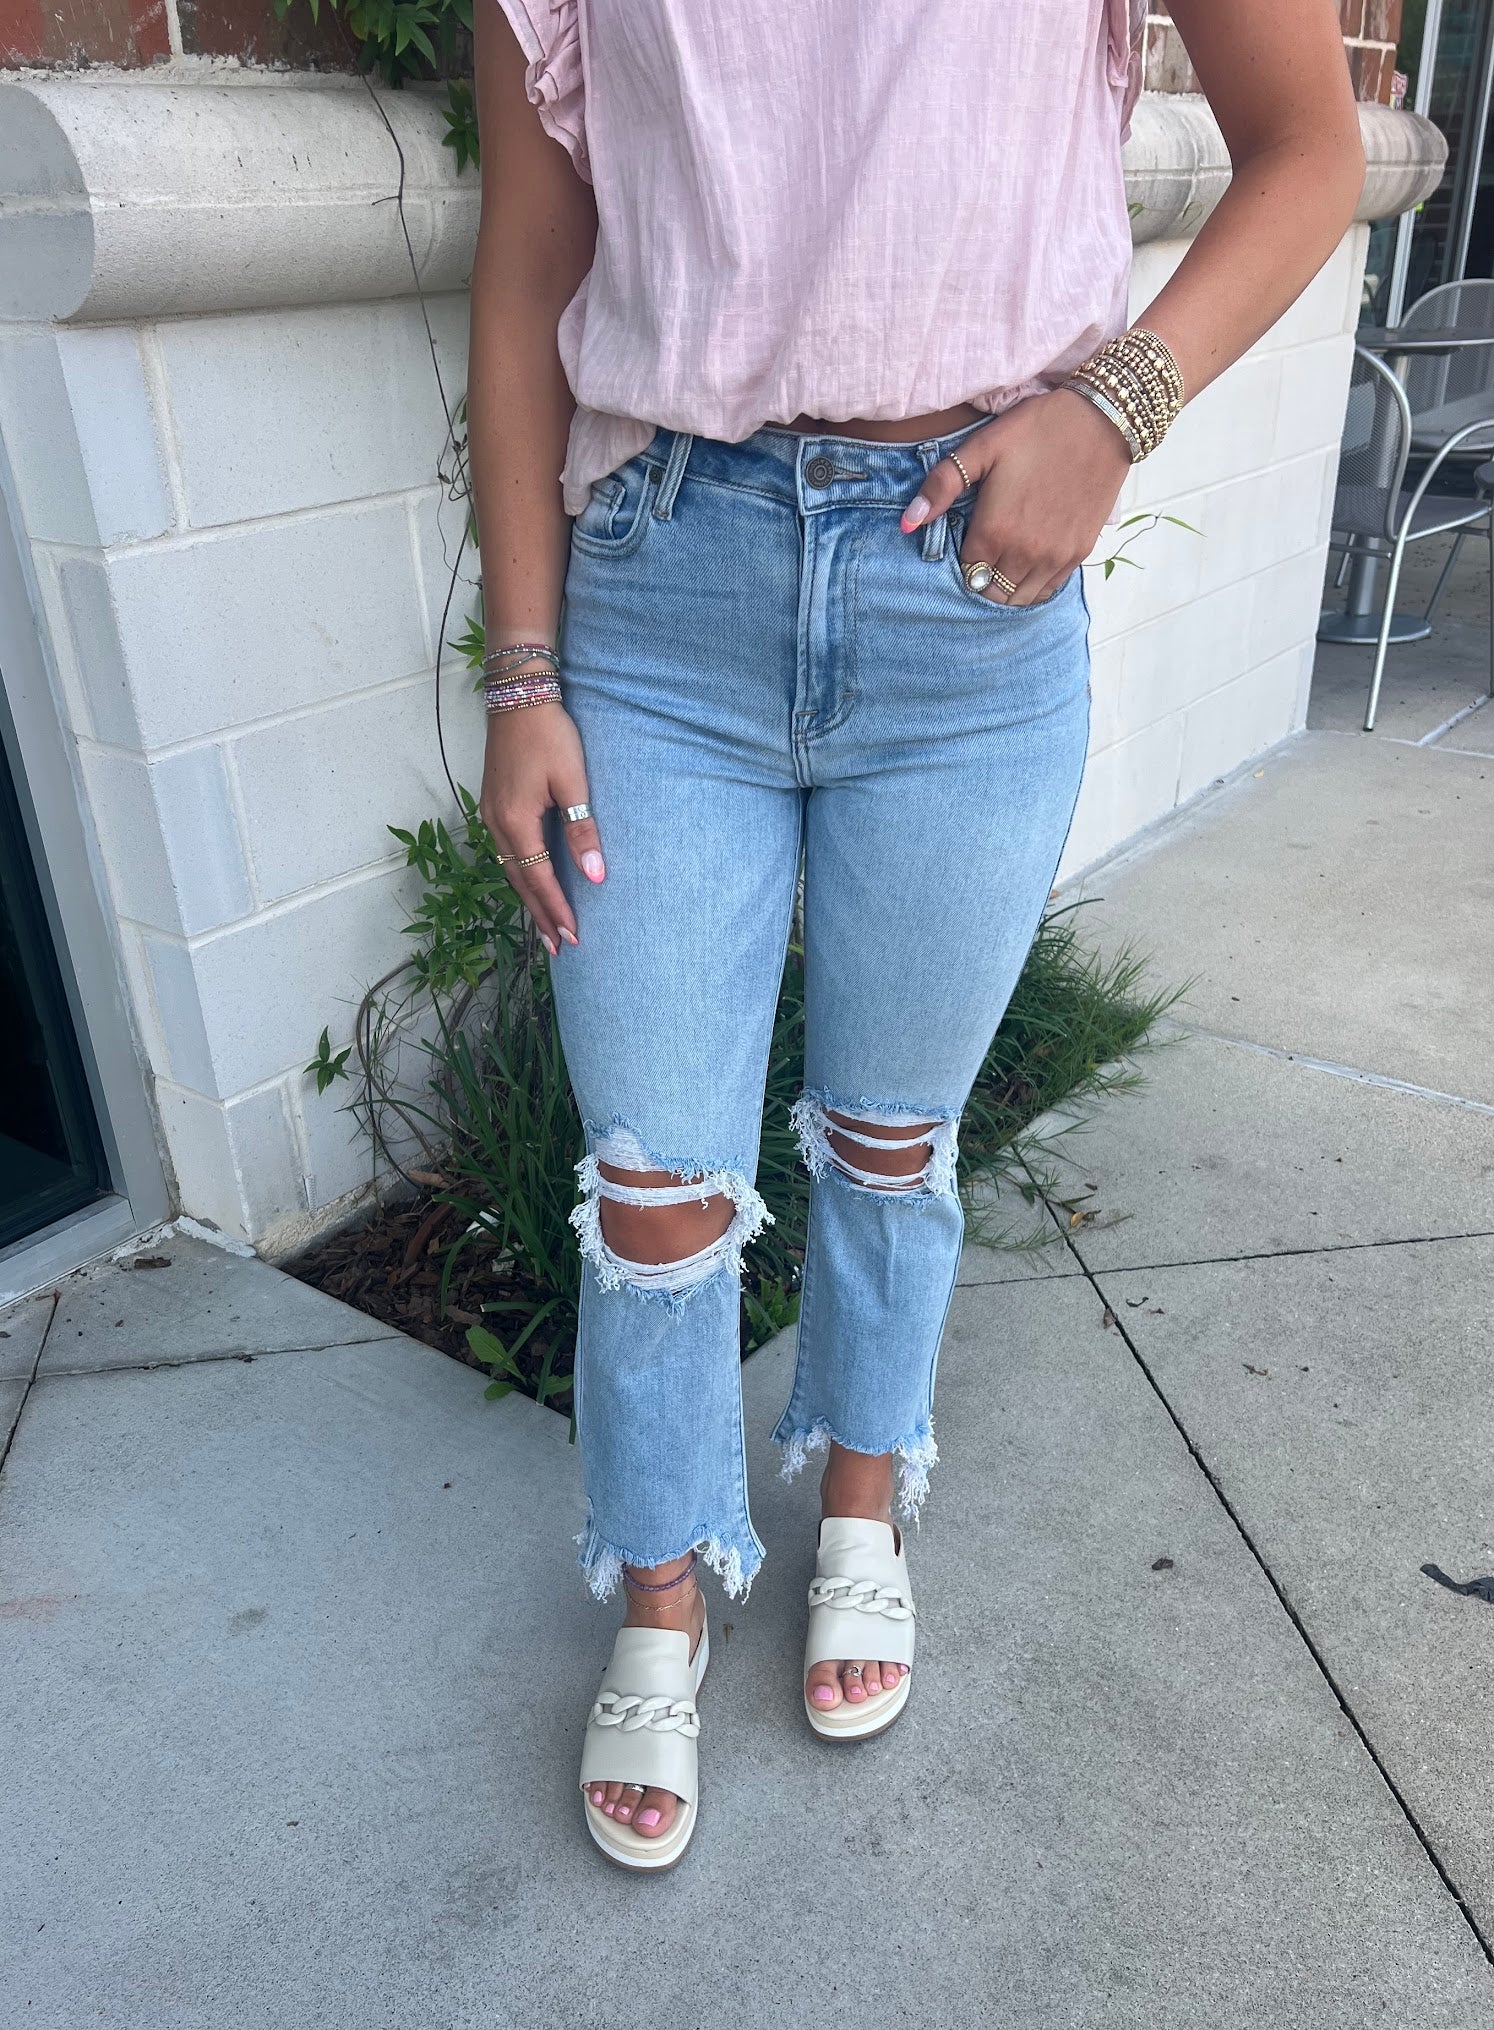 Happi Crop Flare Jeans Jeans in 24 at Wrapsody